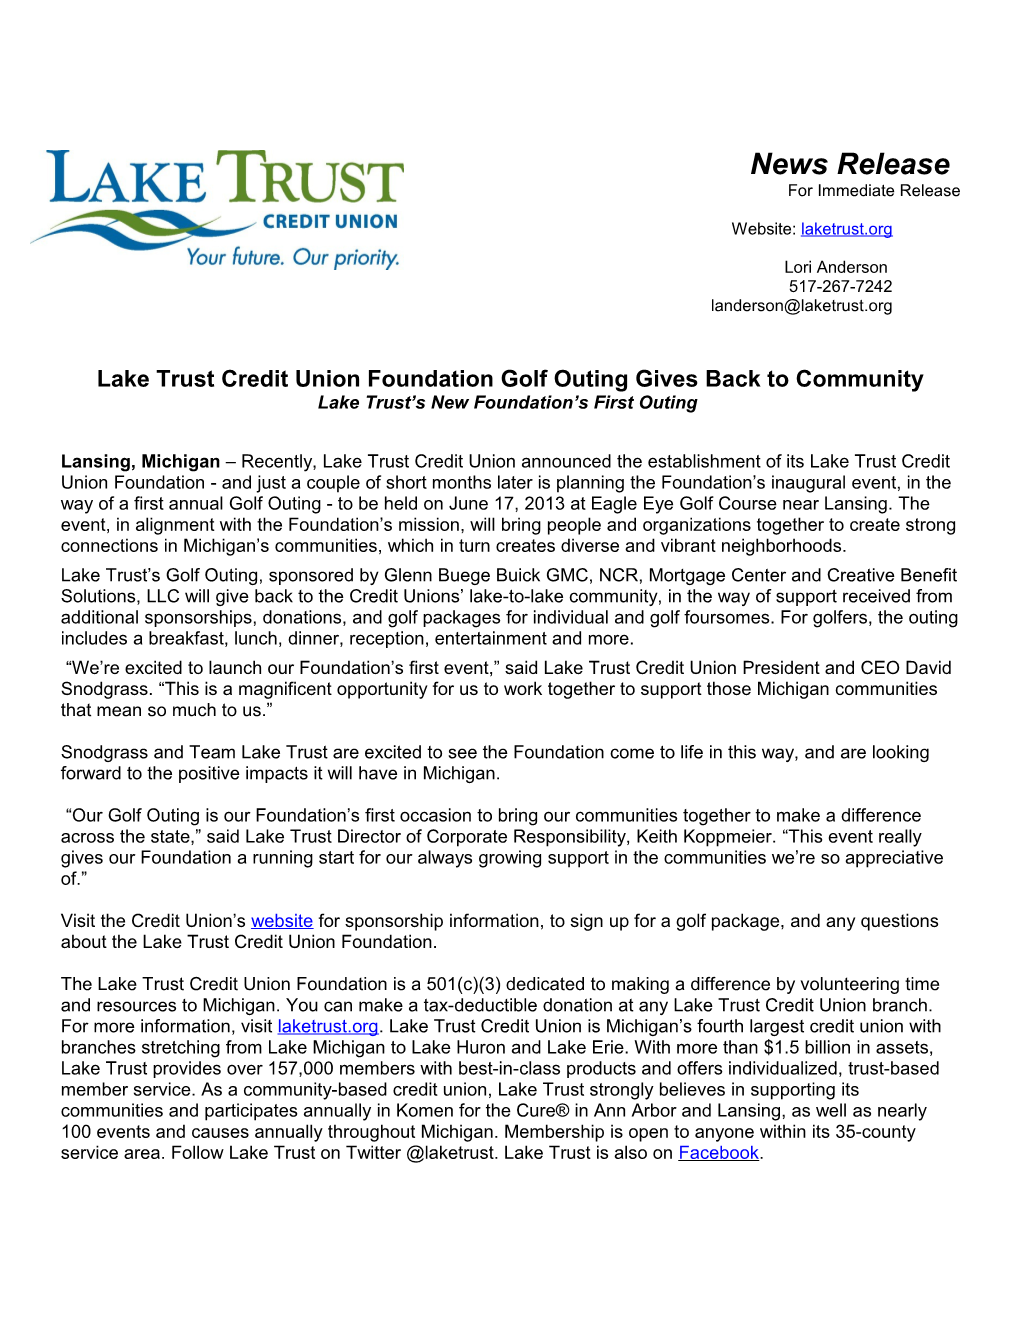 Lake Trust Credit Union Foundation Golf Outing Gives Back to Community